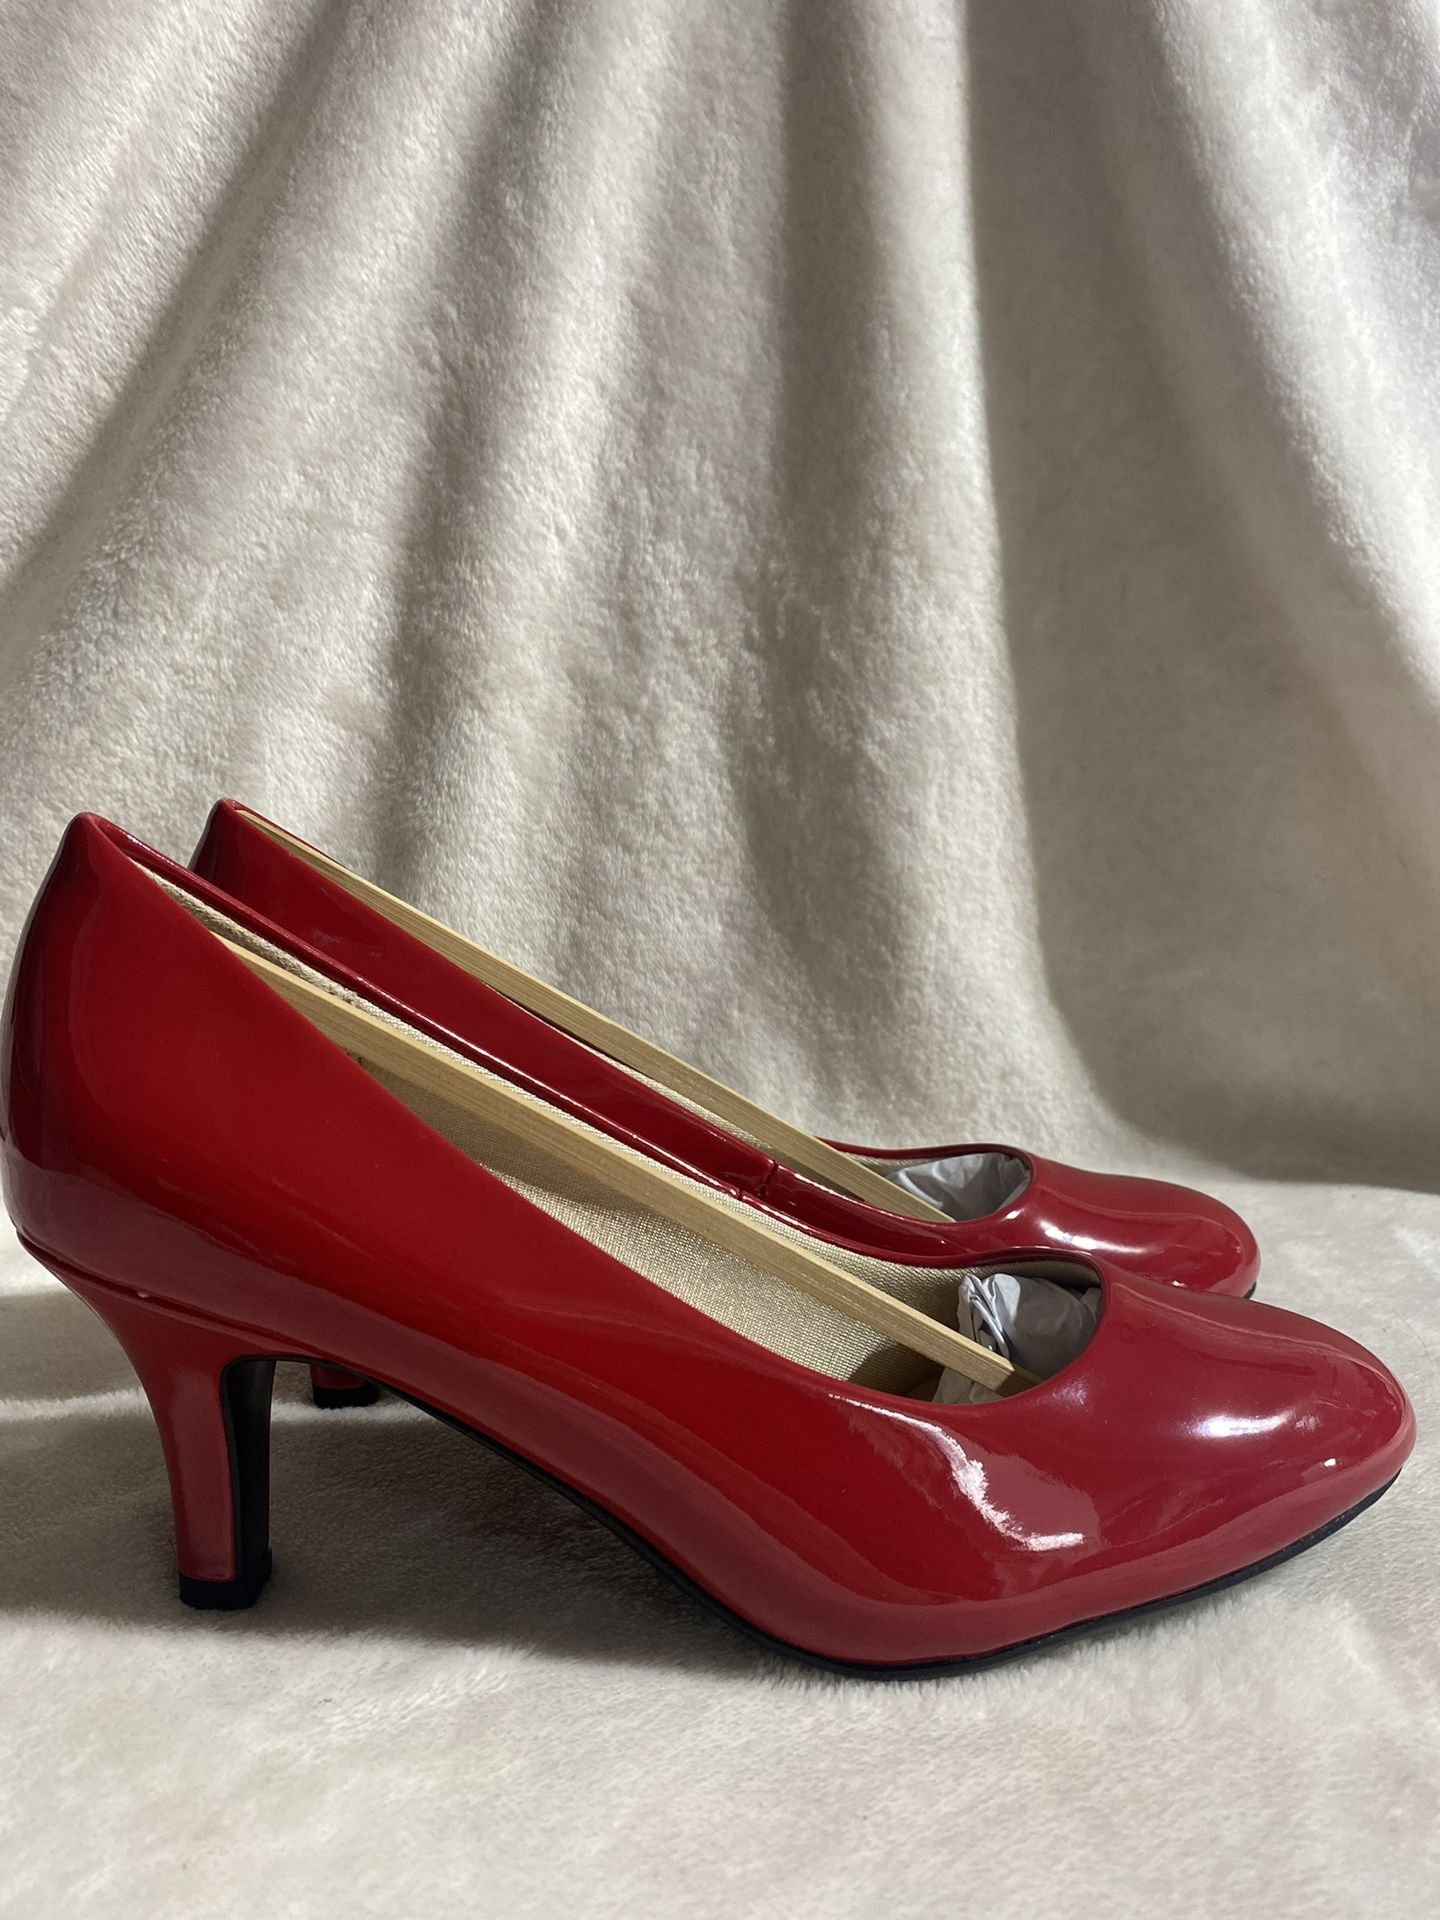 Life Stride Red Heels Size 6W New